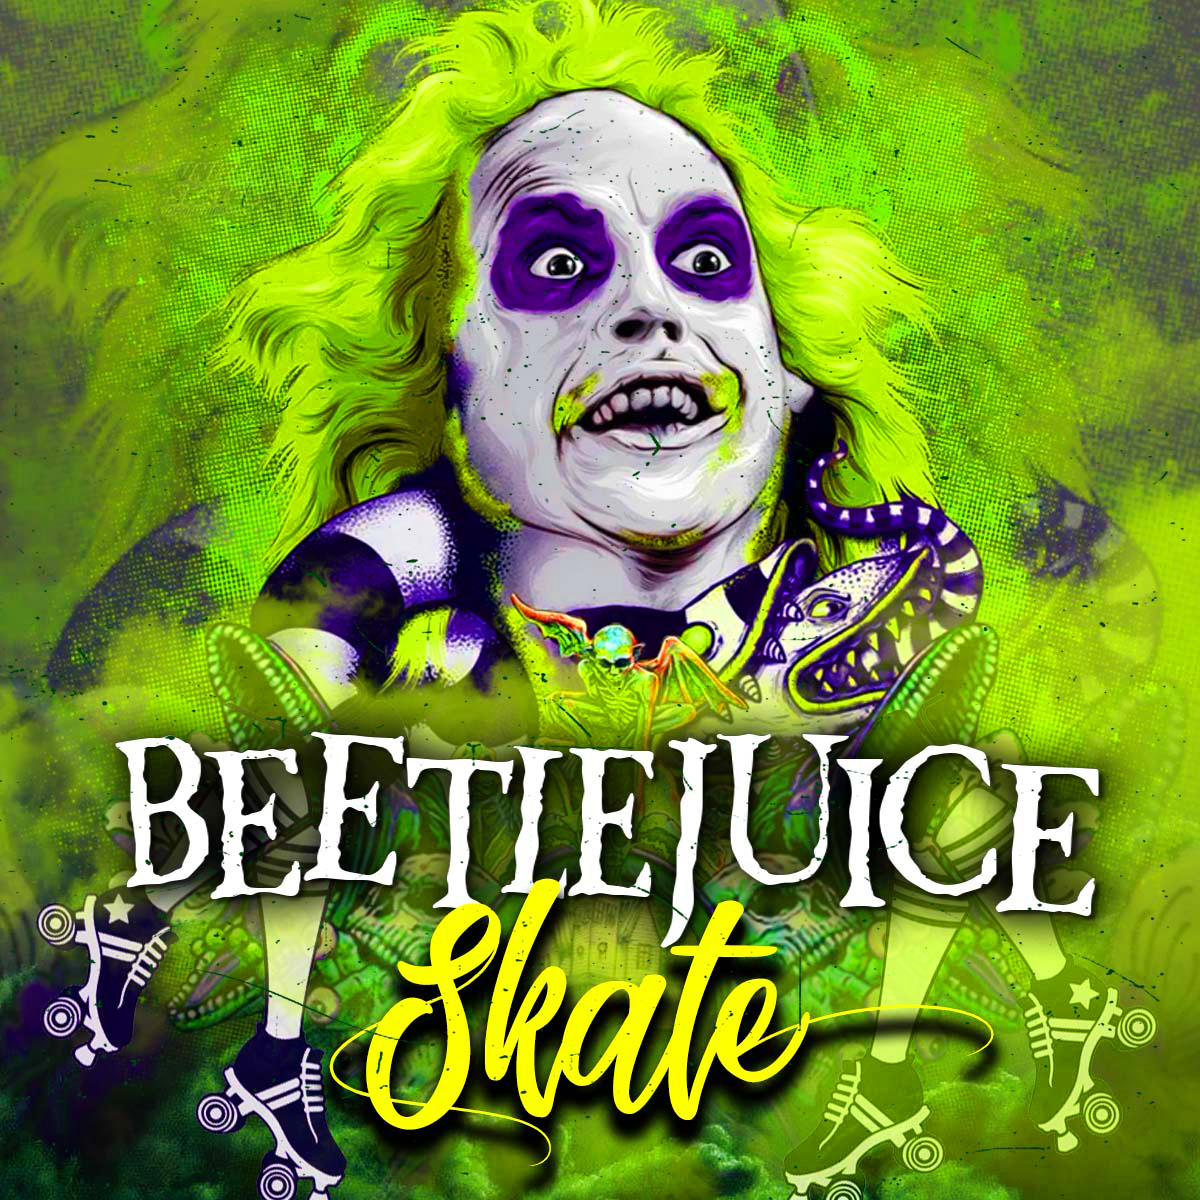 Family Game Night with Beetlejuice | Great Skate